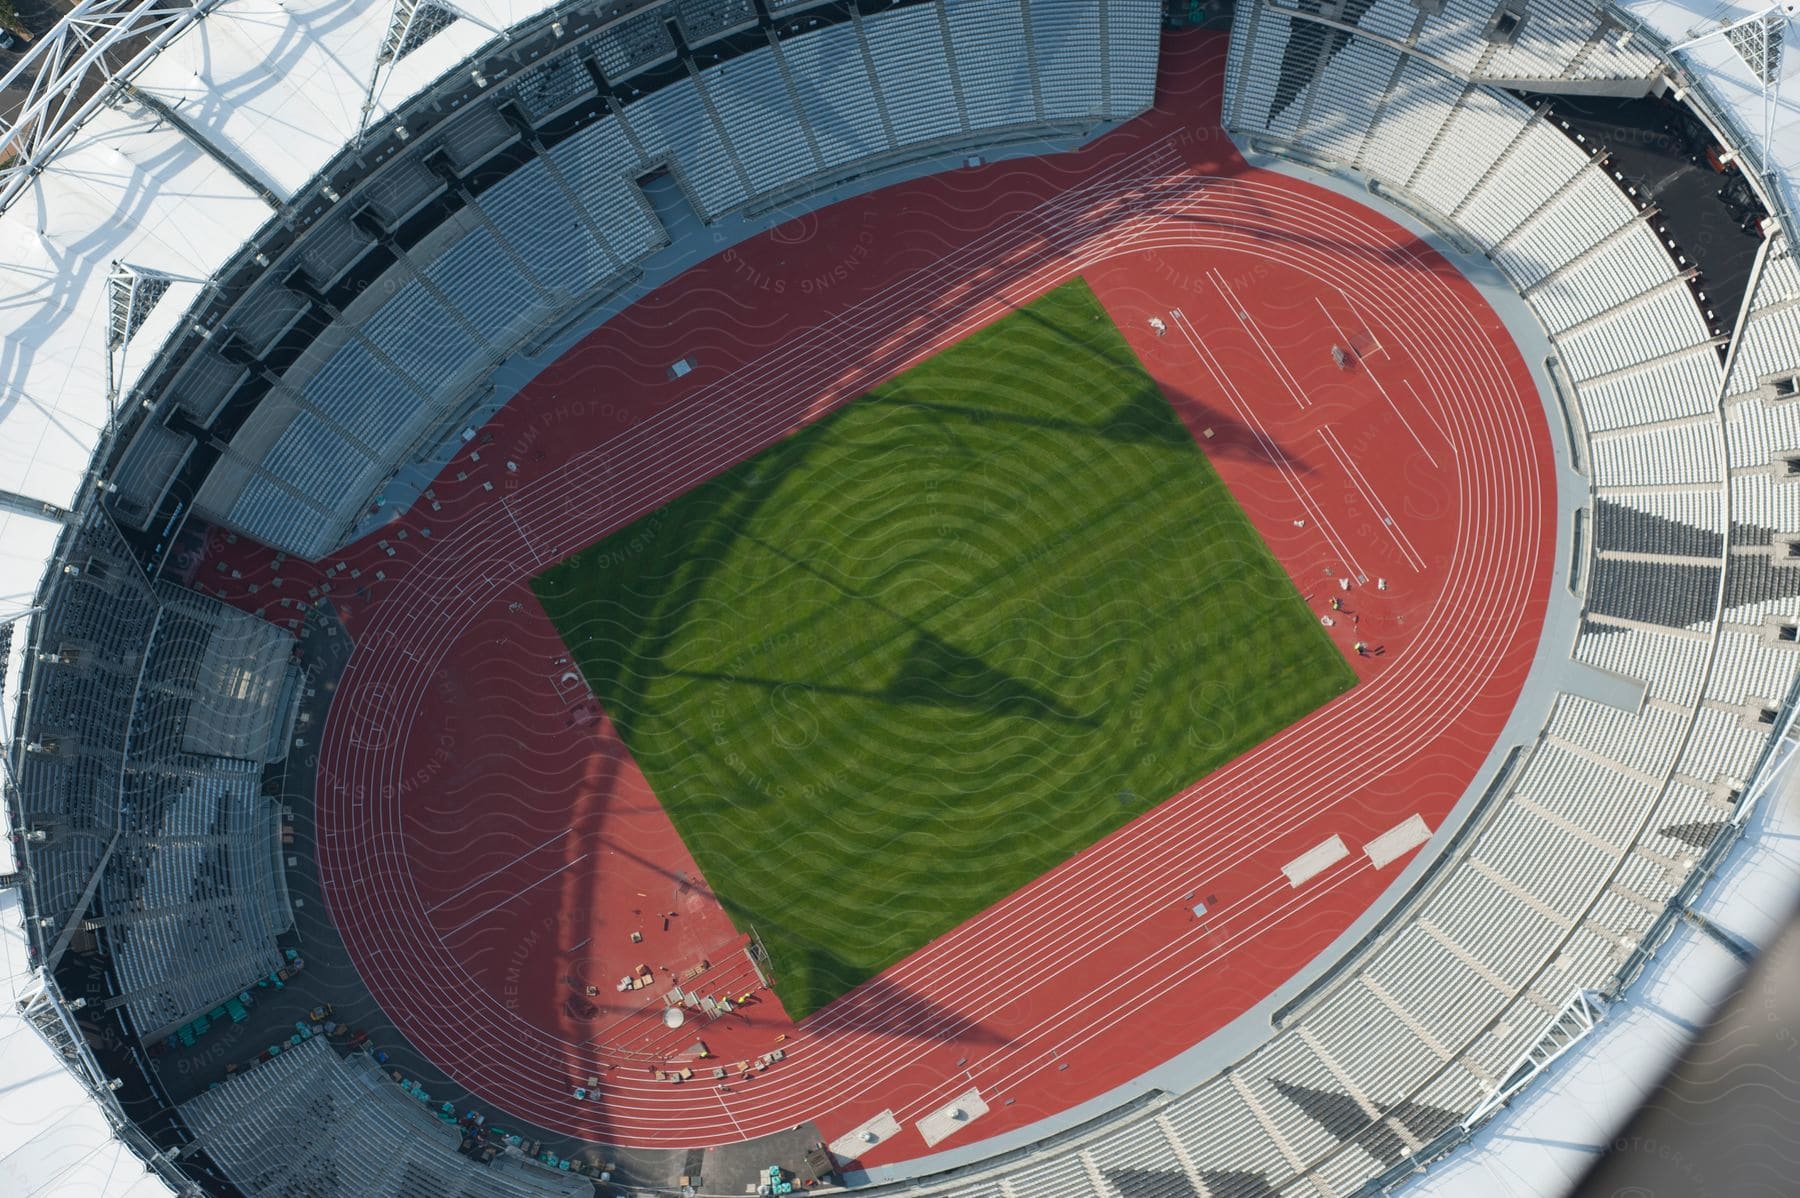 Aerial view of a massive white olympic stadium with a burnt red race track and a perfectly mowed green turf lawn